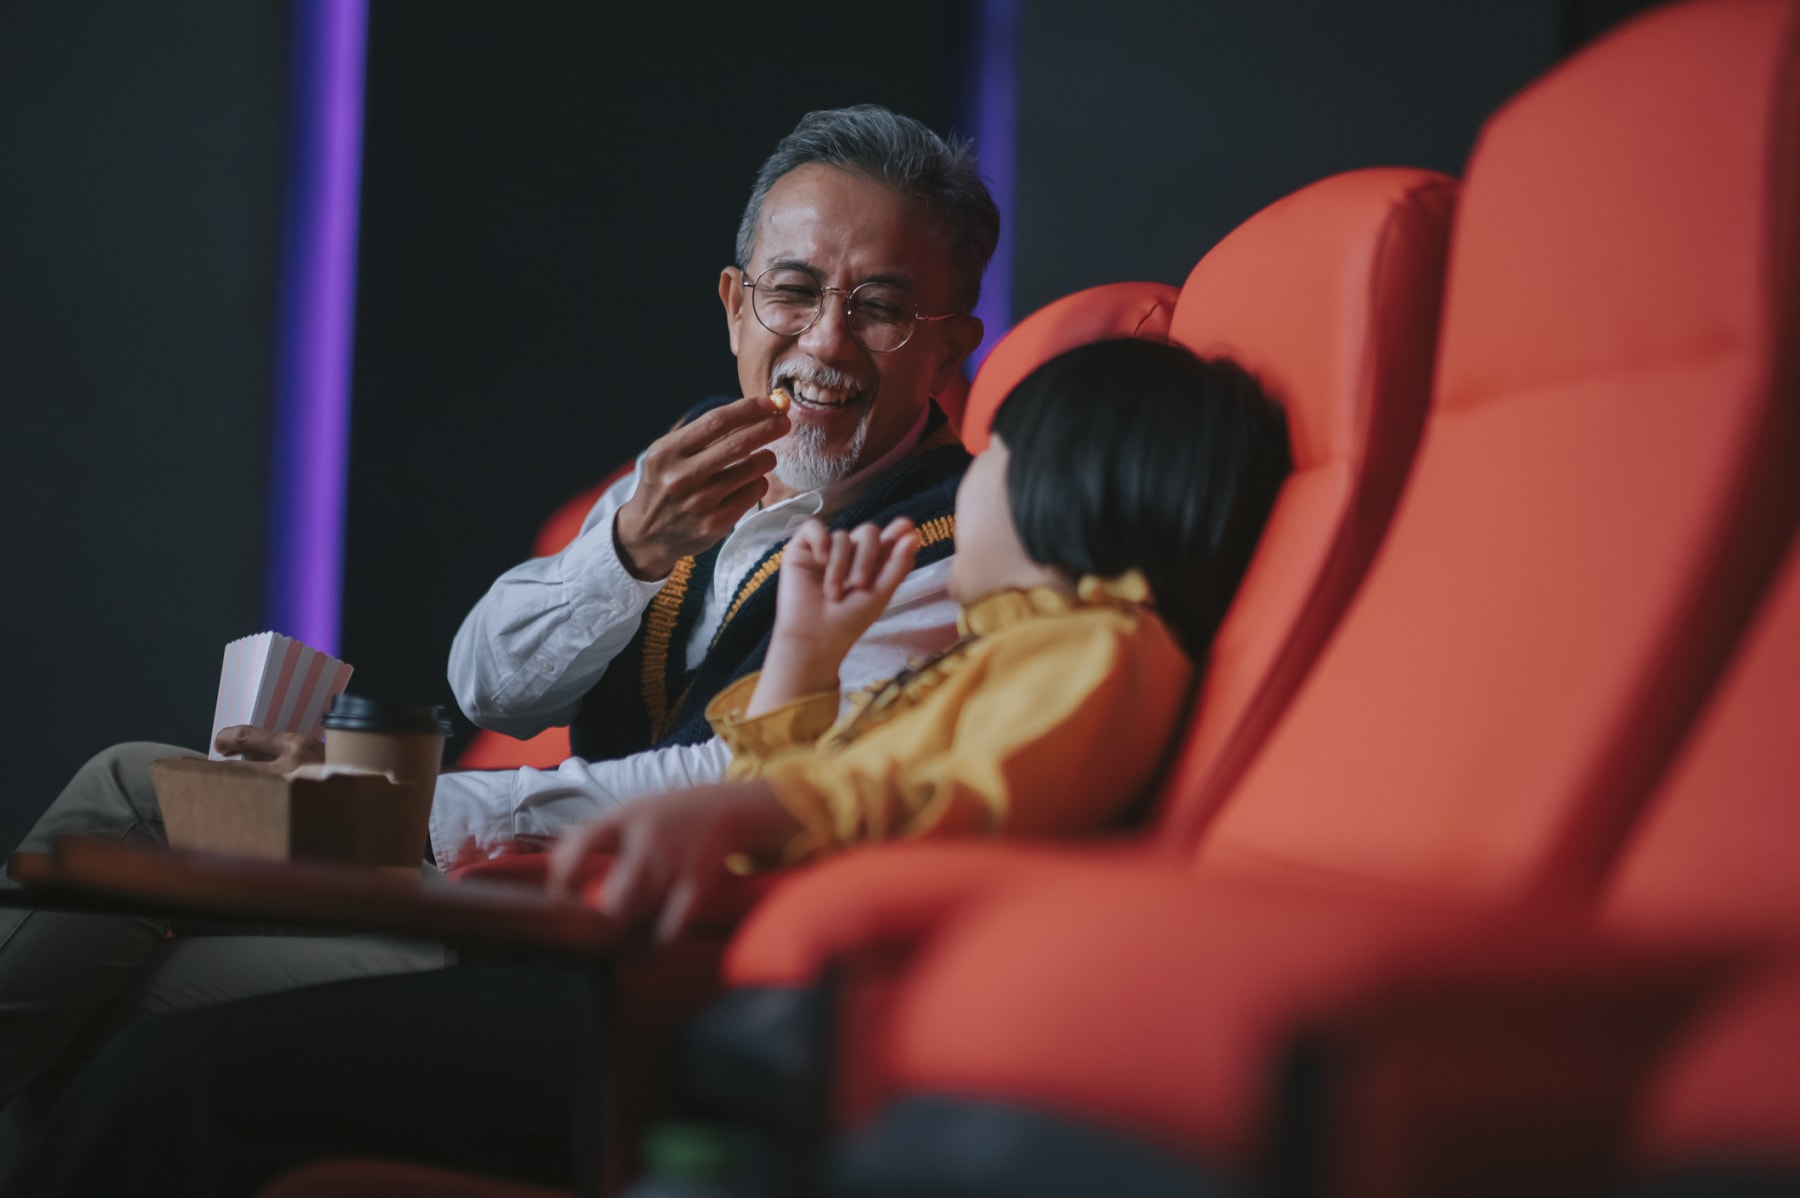 A man and his granddaughter enjoy snacks in a movie theater.